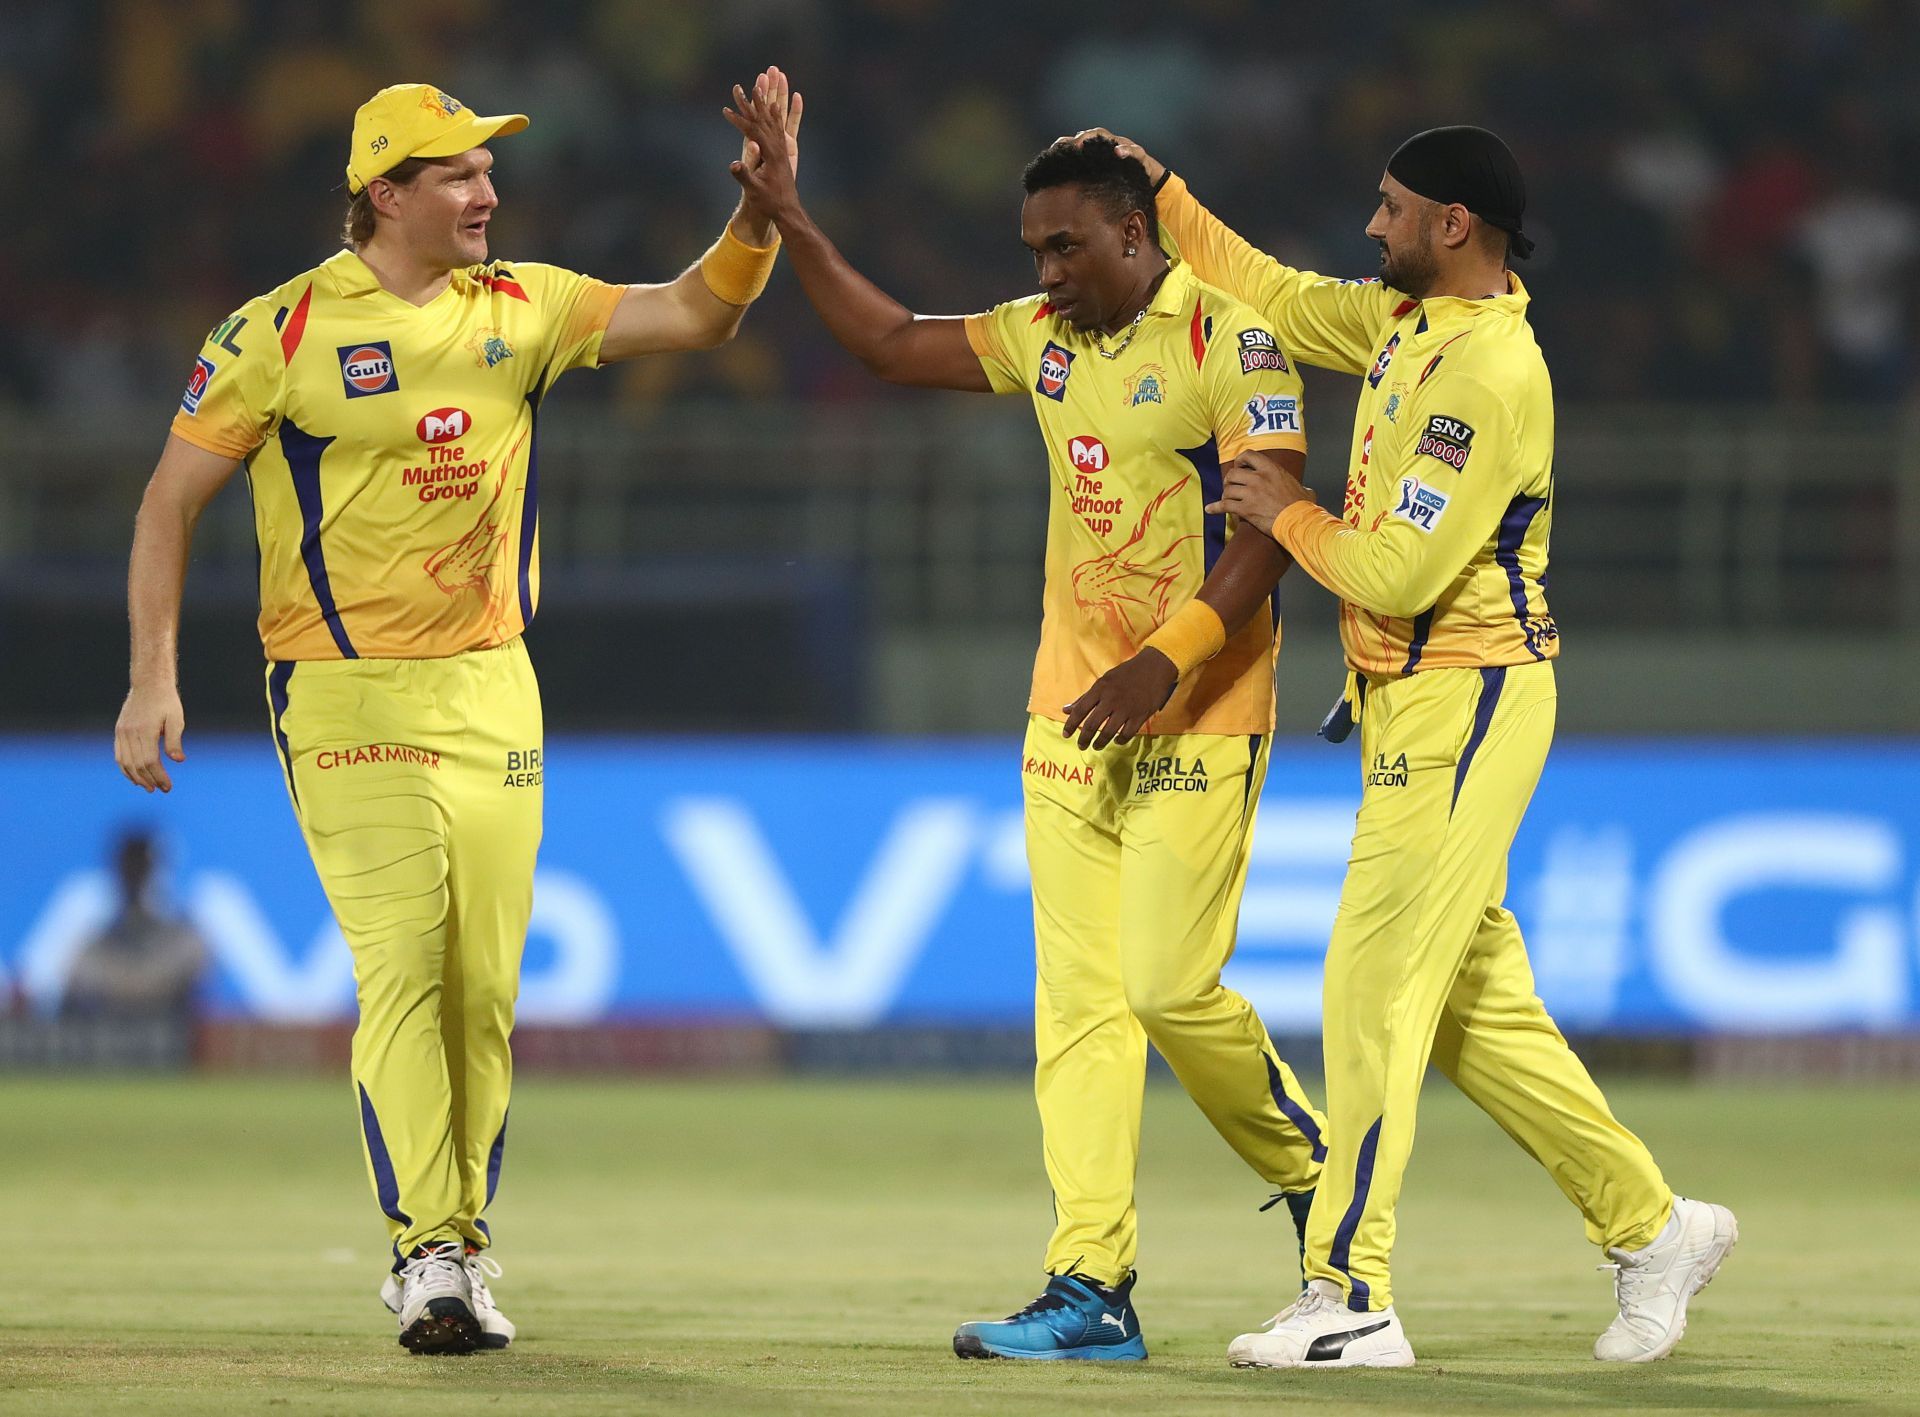 Dwayne Bravo played several seasons for CSK. (Credits: Getty)